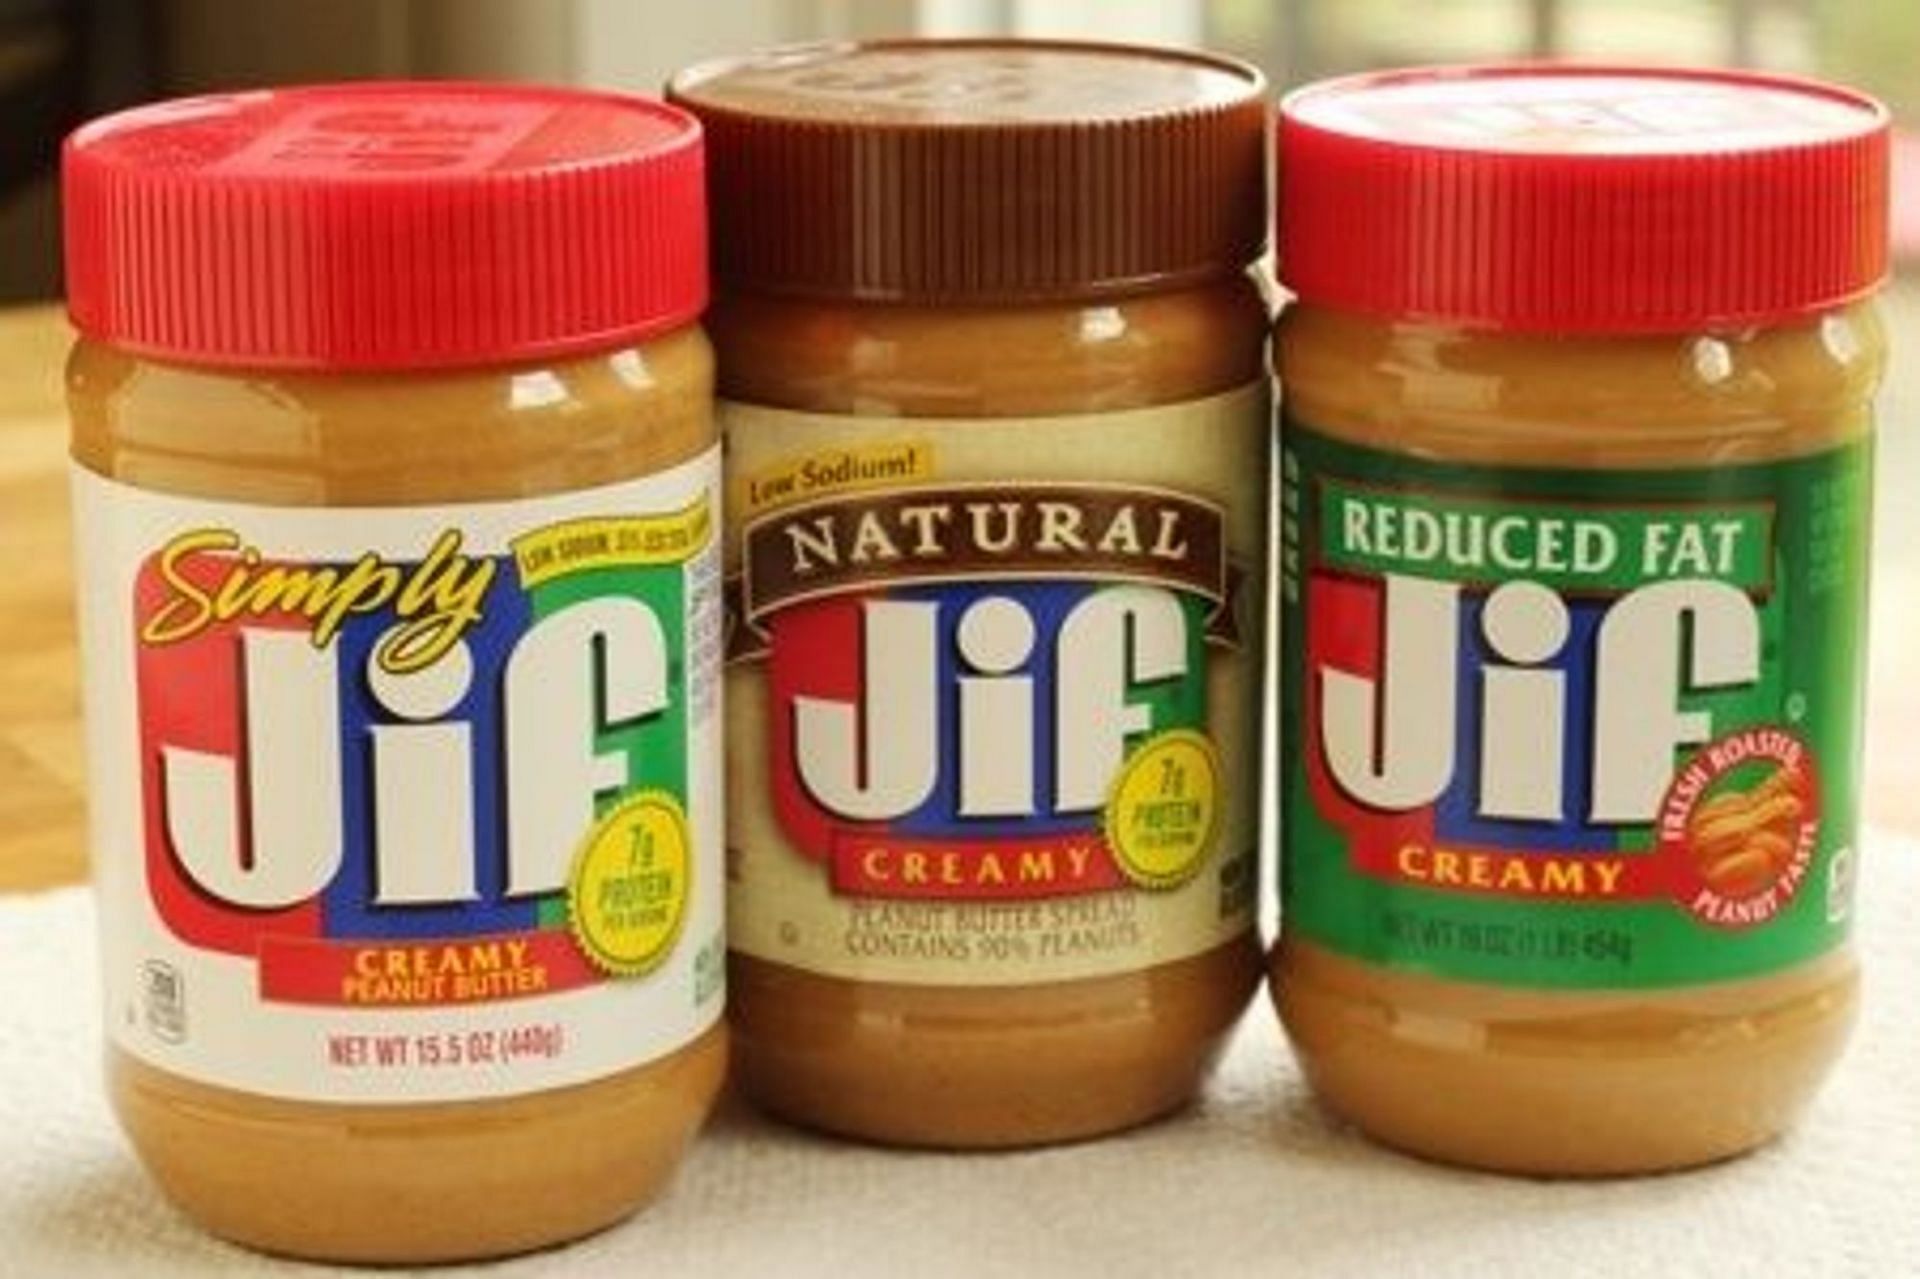 Jif withdraws several batches of peanut butter amid salmonella fears (Image via AGJeff/Twitter)